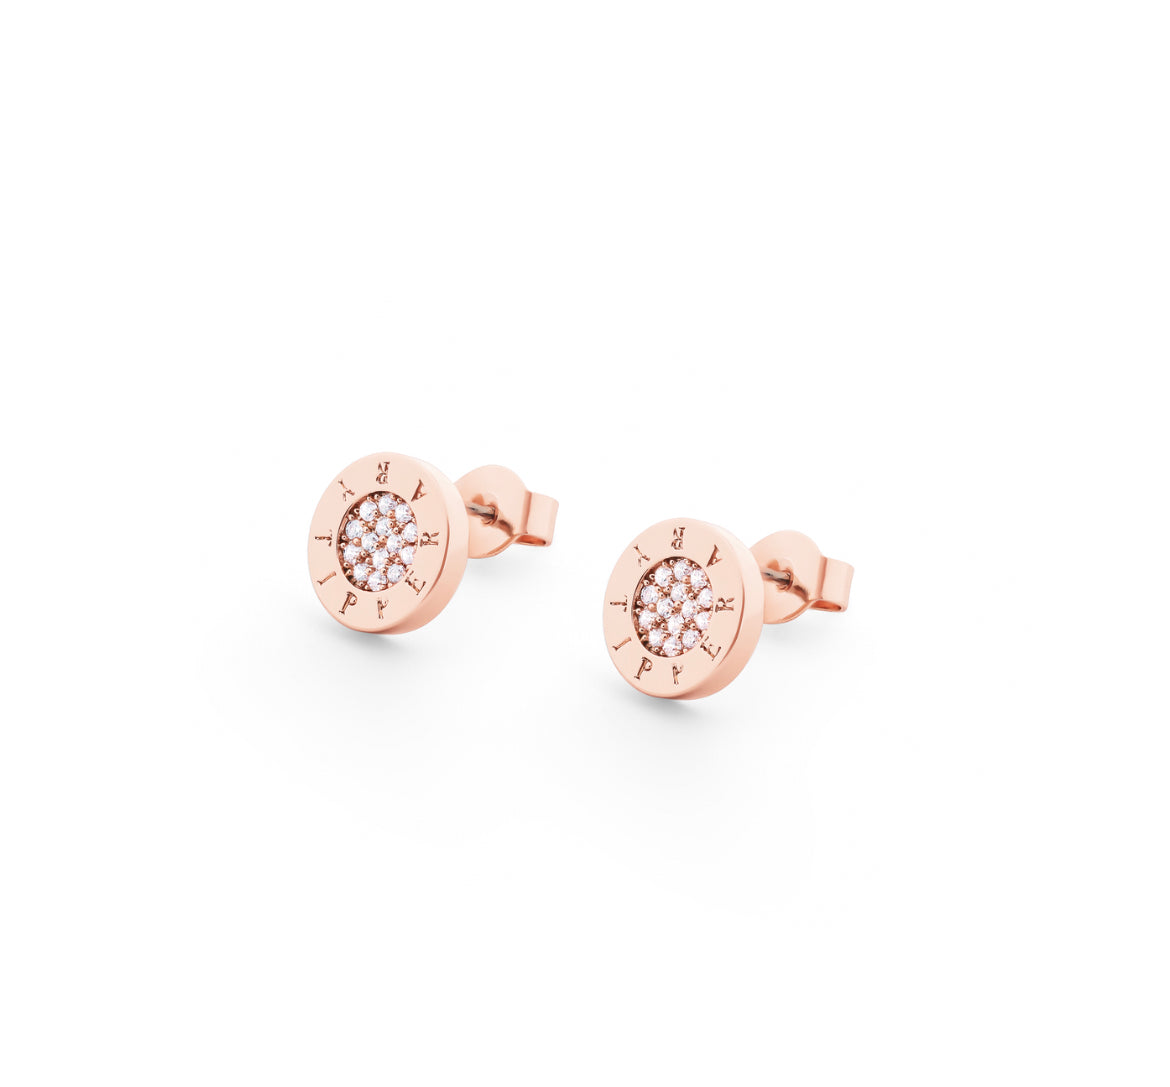 Tipperary Crystal Earrings - Pavé Circle Collection - Circle Pave Stud - Silver Plated